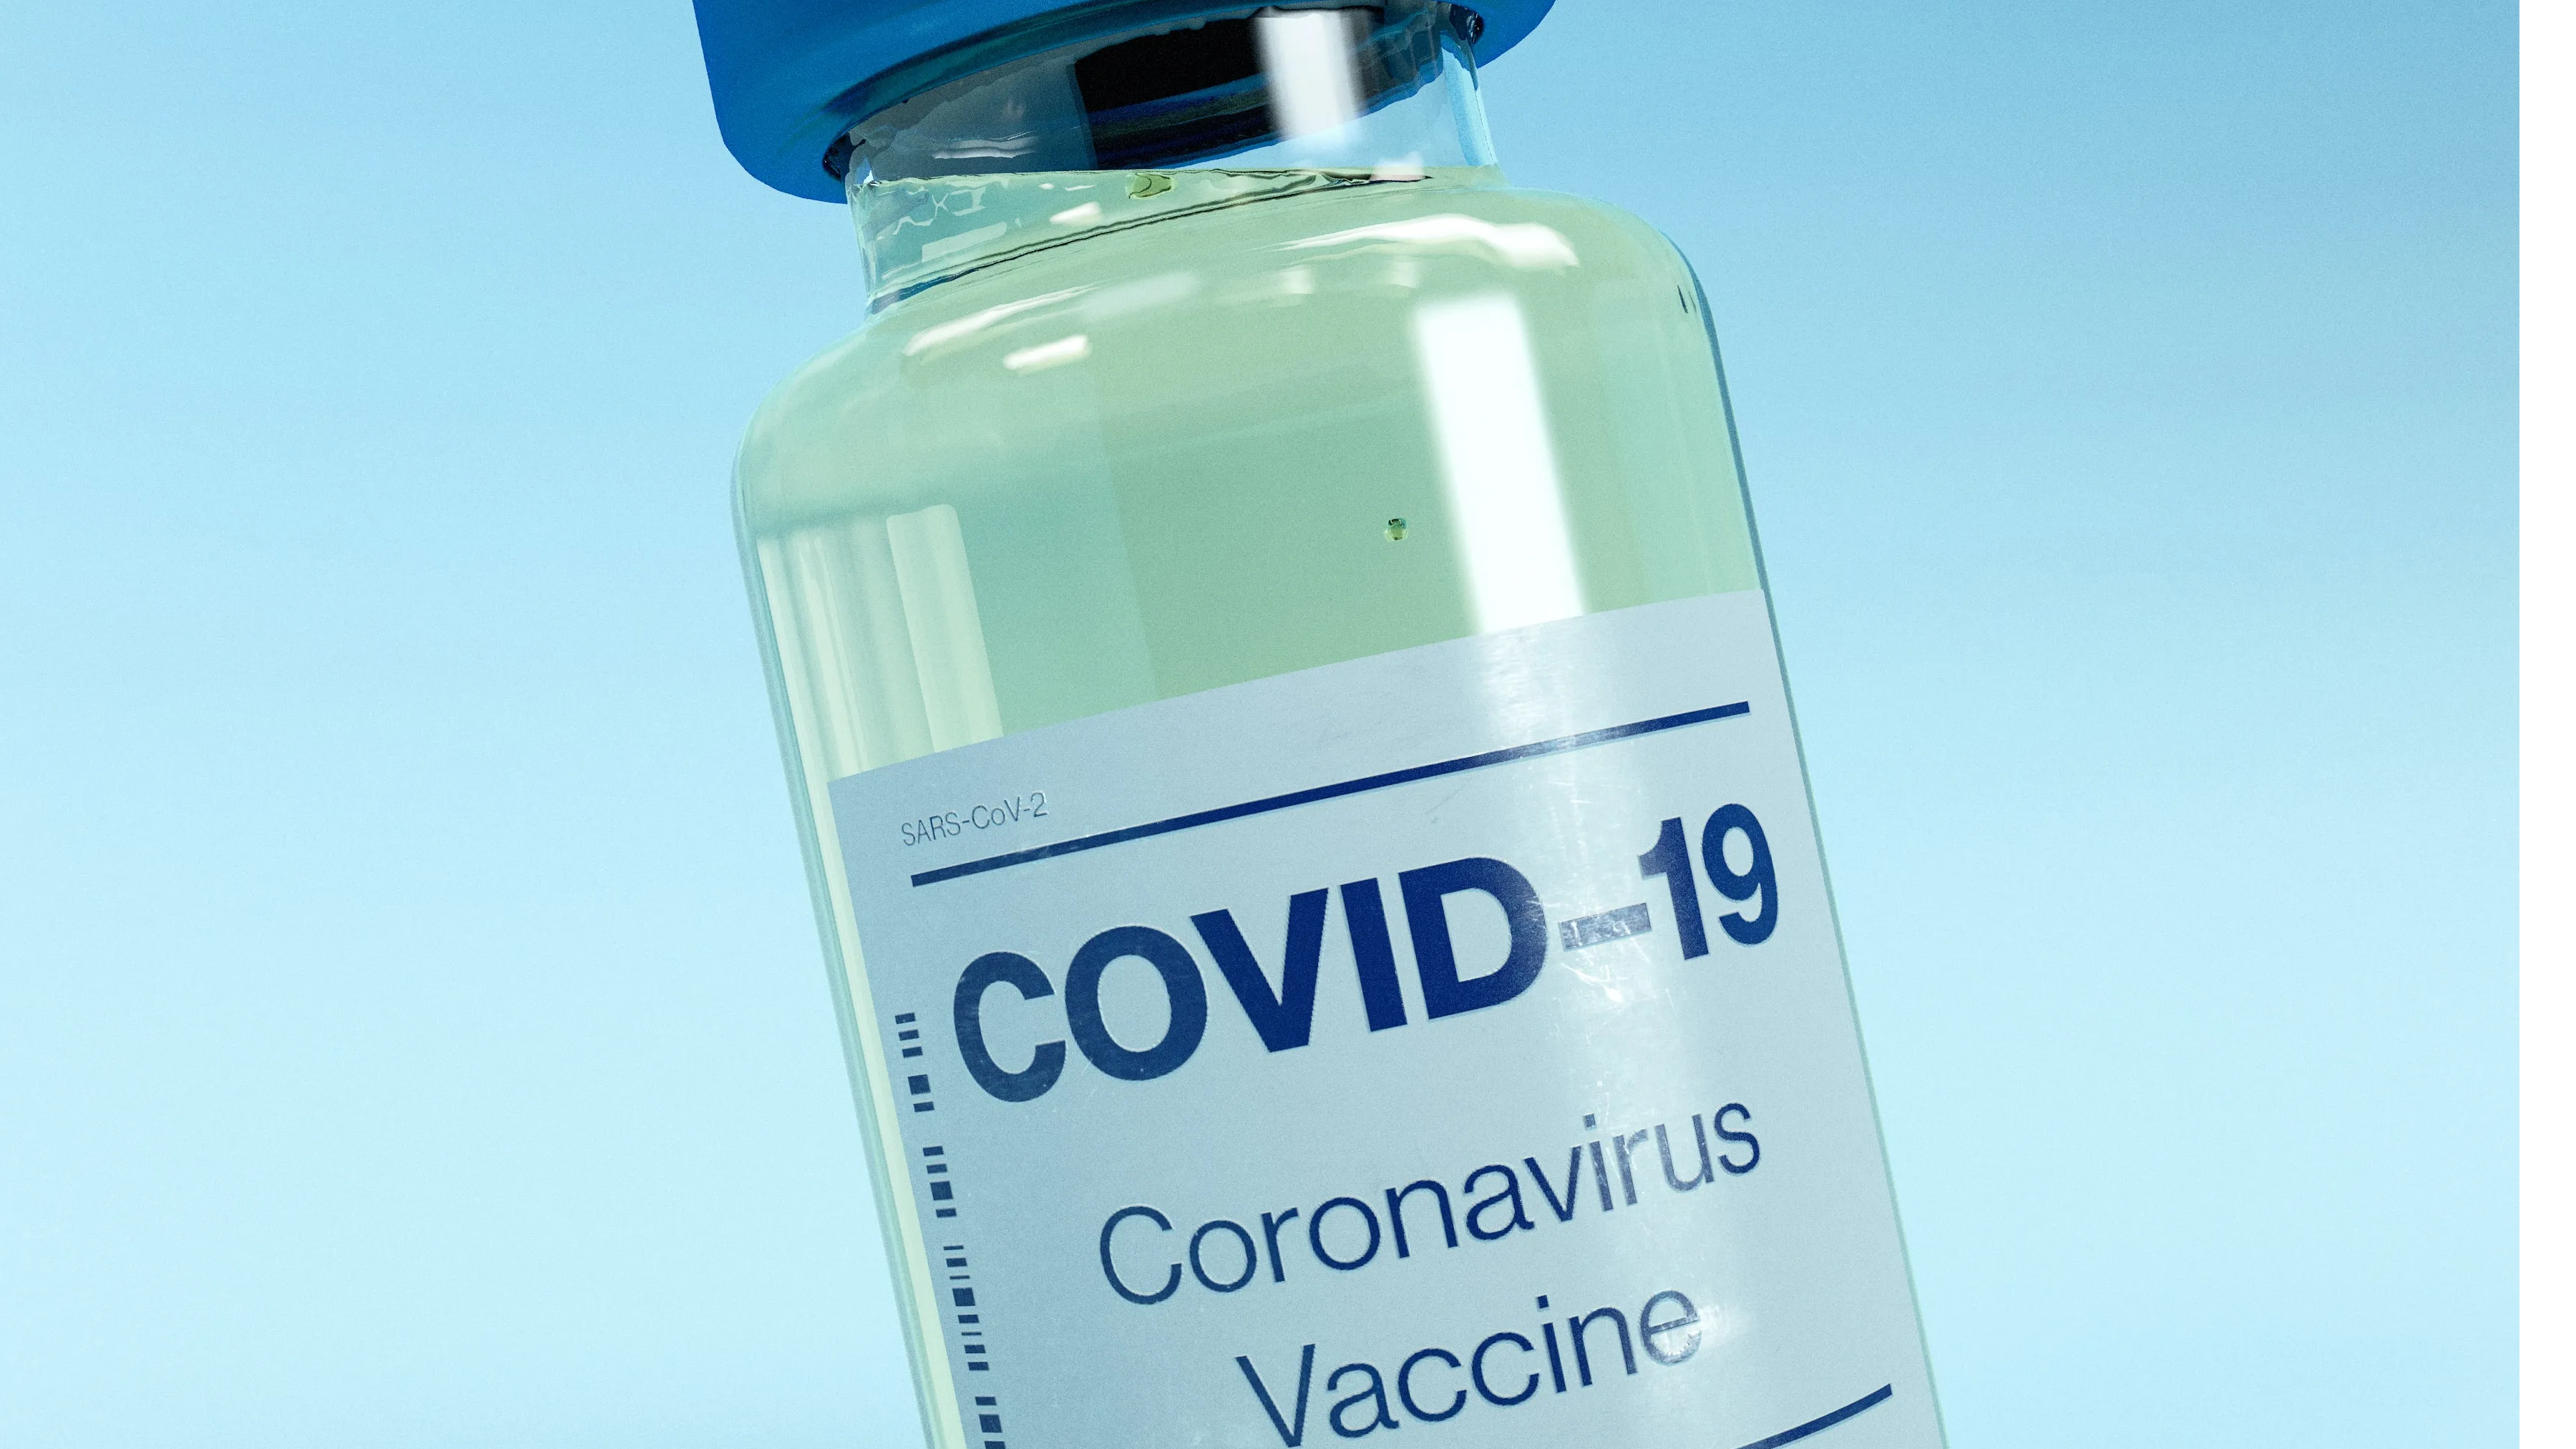 New York lowers COVID-19 vaccine eligibility age to 60 years